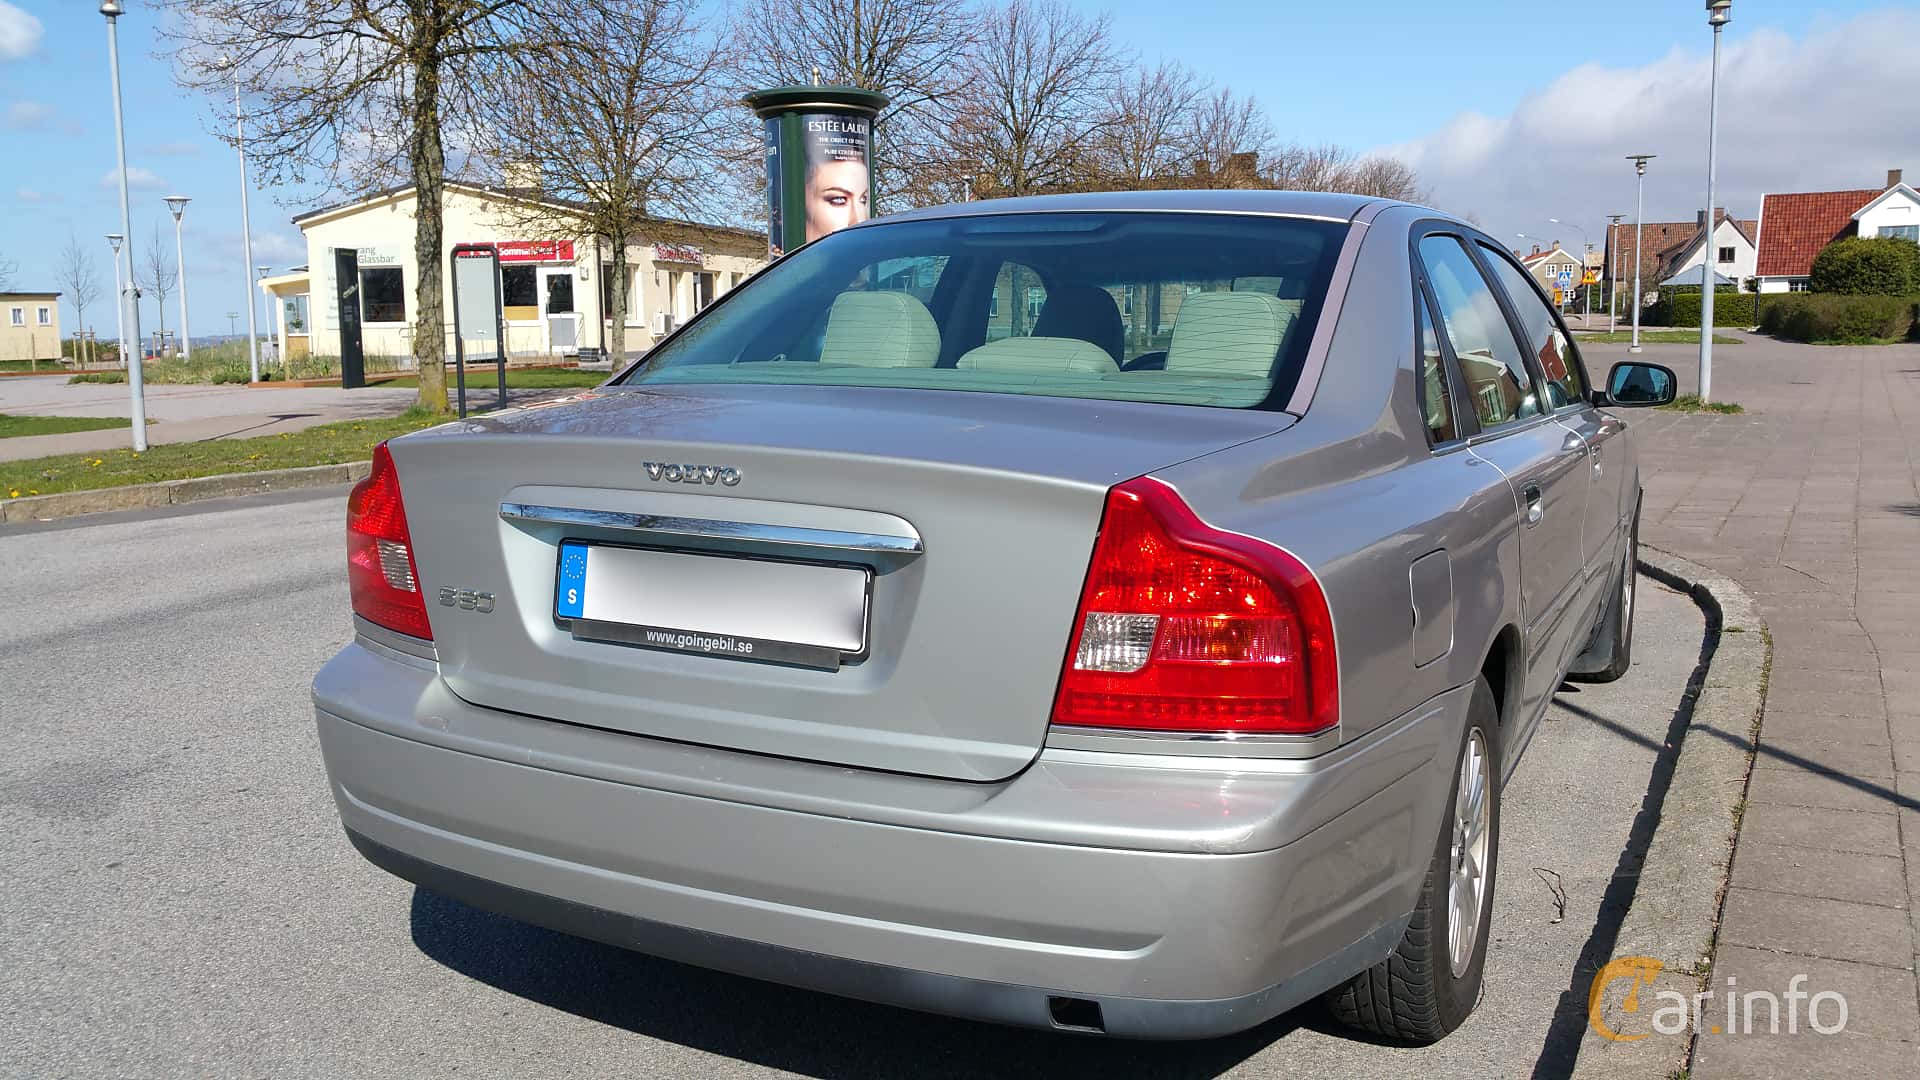 2 images of Volvo S80 2.4 Automatic, 140hp, 2005 by Jonatan